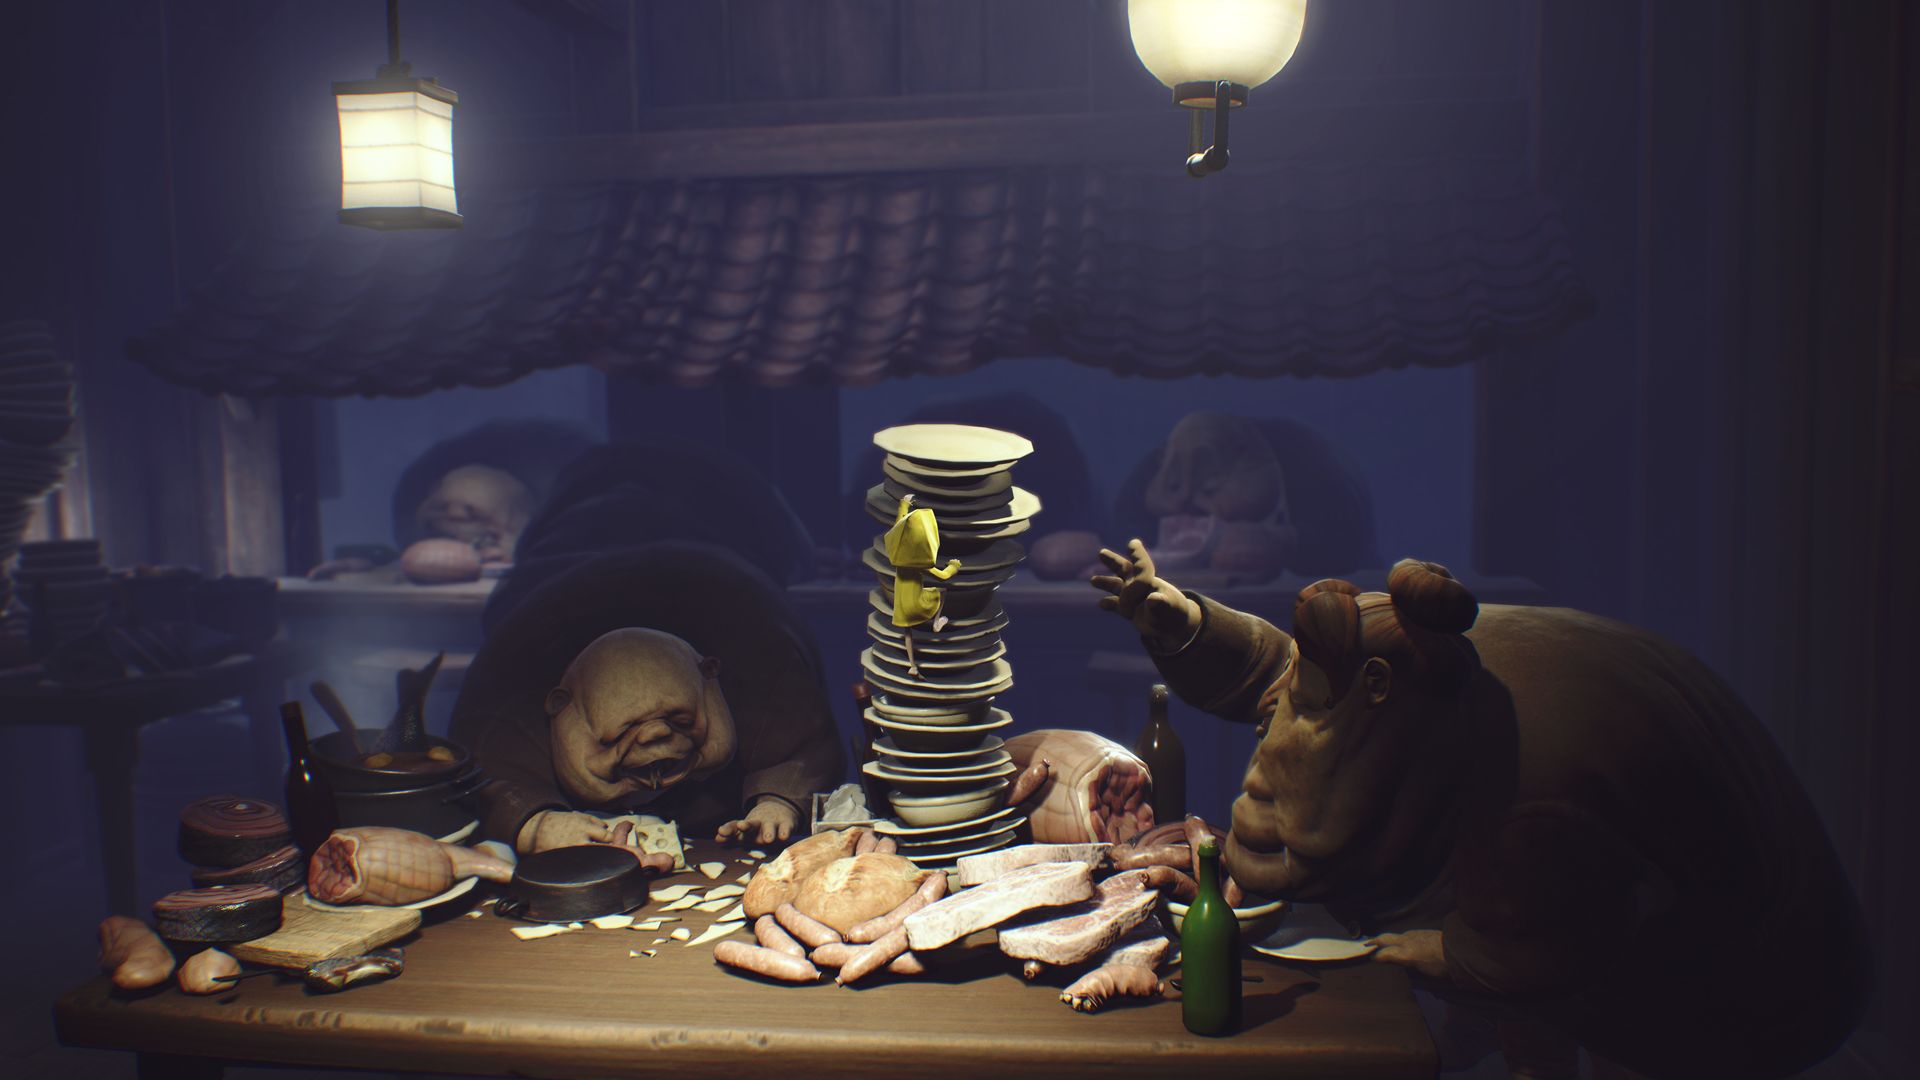 Finally, Little Nightmares Has Gone Gold As Announced By Tarsier